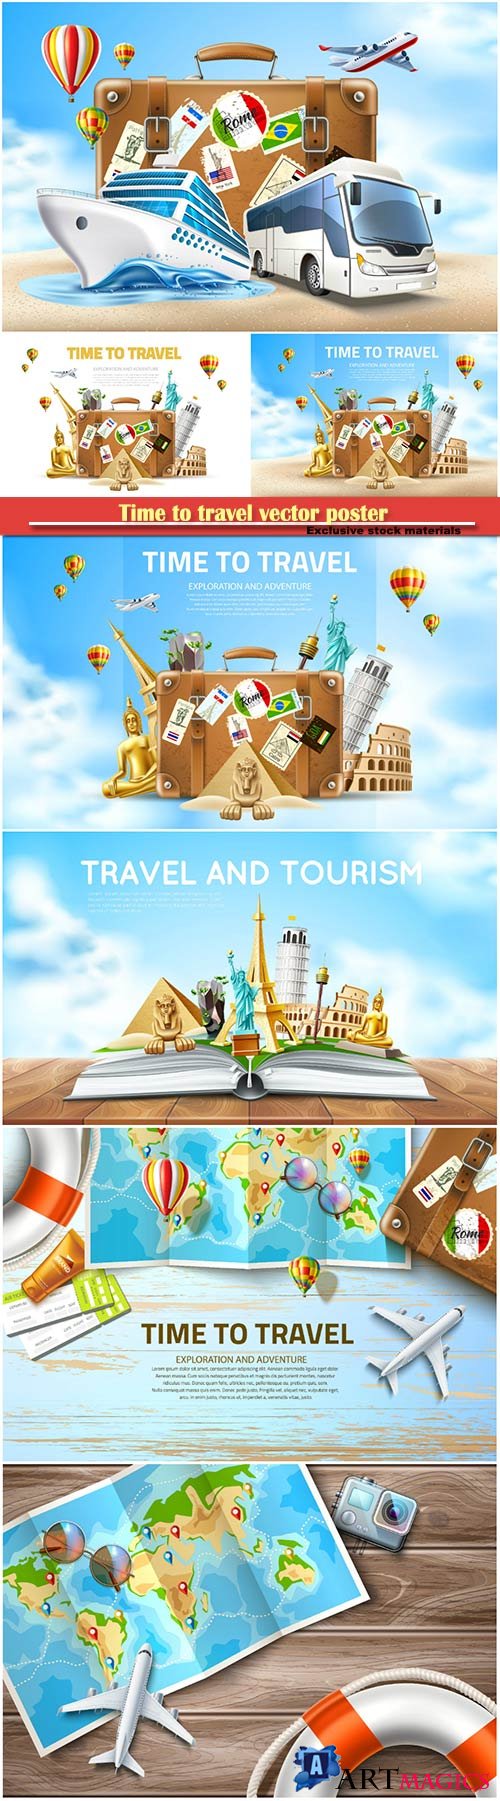 Time to travel vector poster, travelling and tourism banner